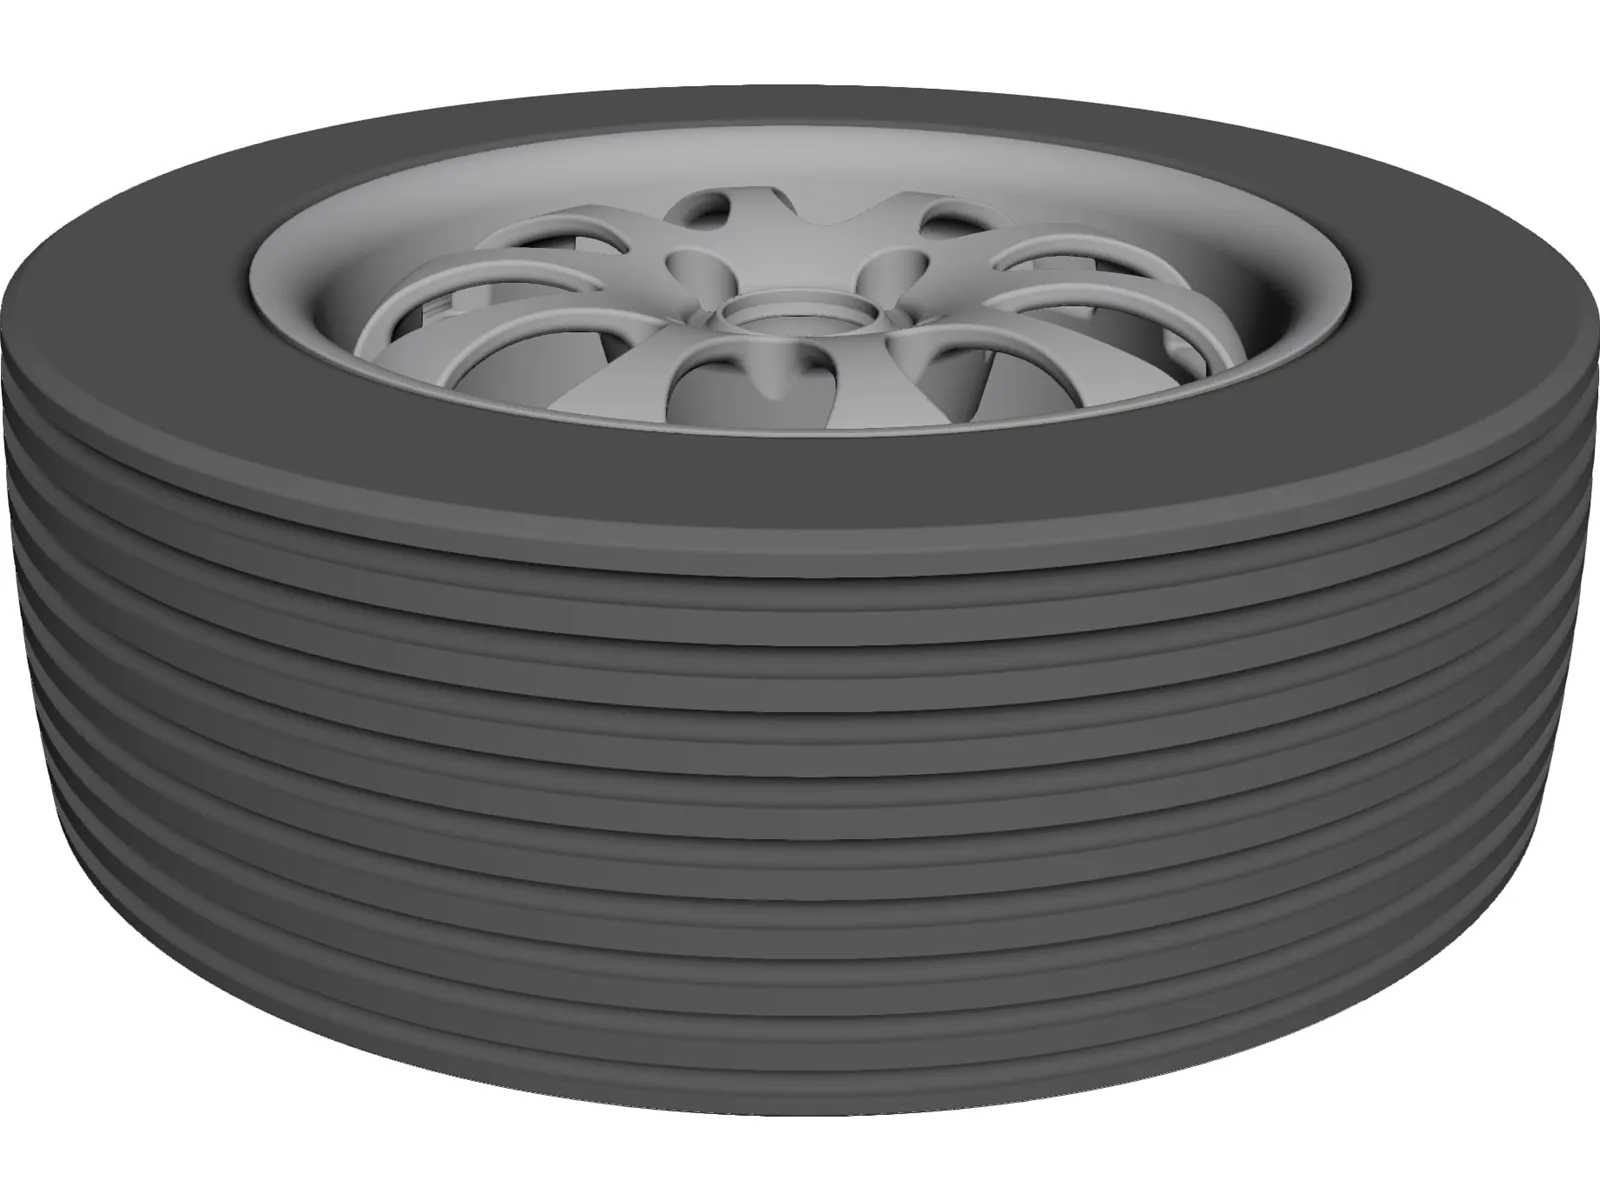 Tyre and Rim 3D Model